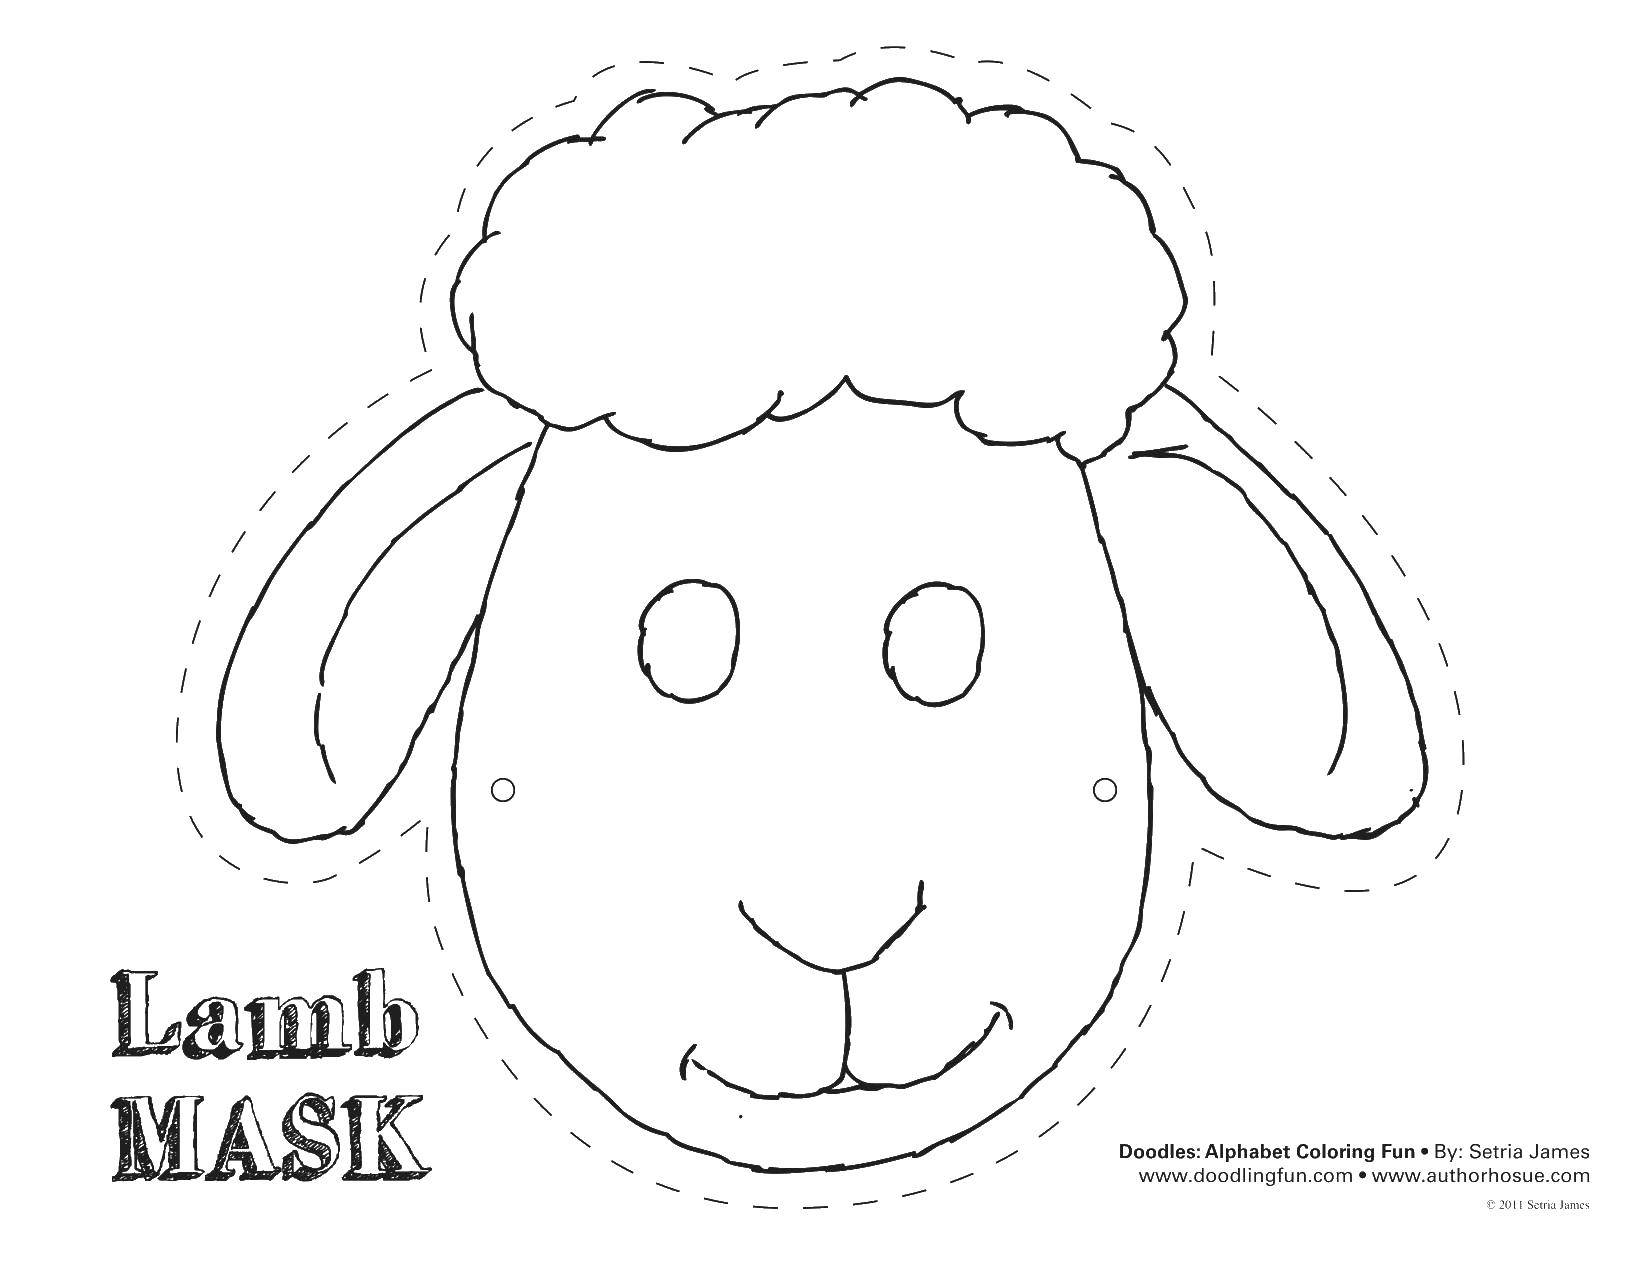 Coloring Head outline sheep. Category The contour of sheep to cut. Tags:  outline , head, lamb.